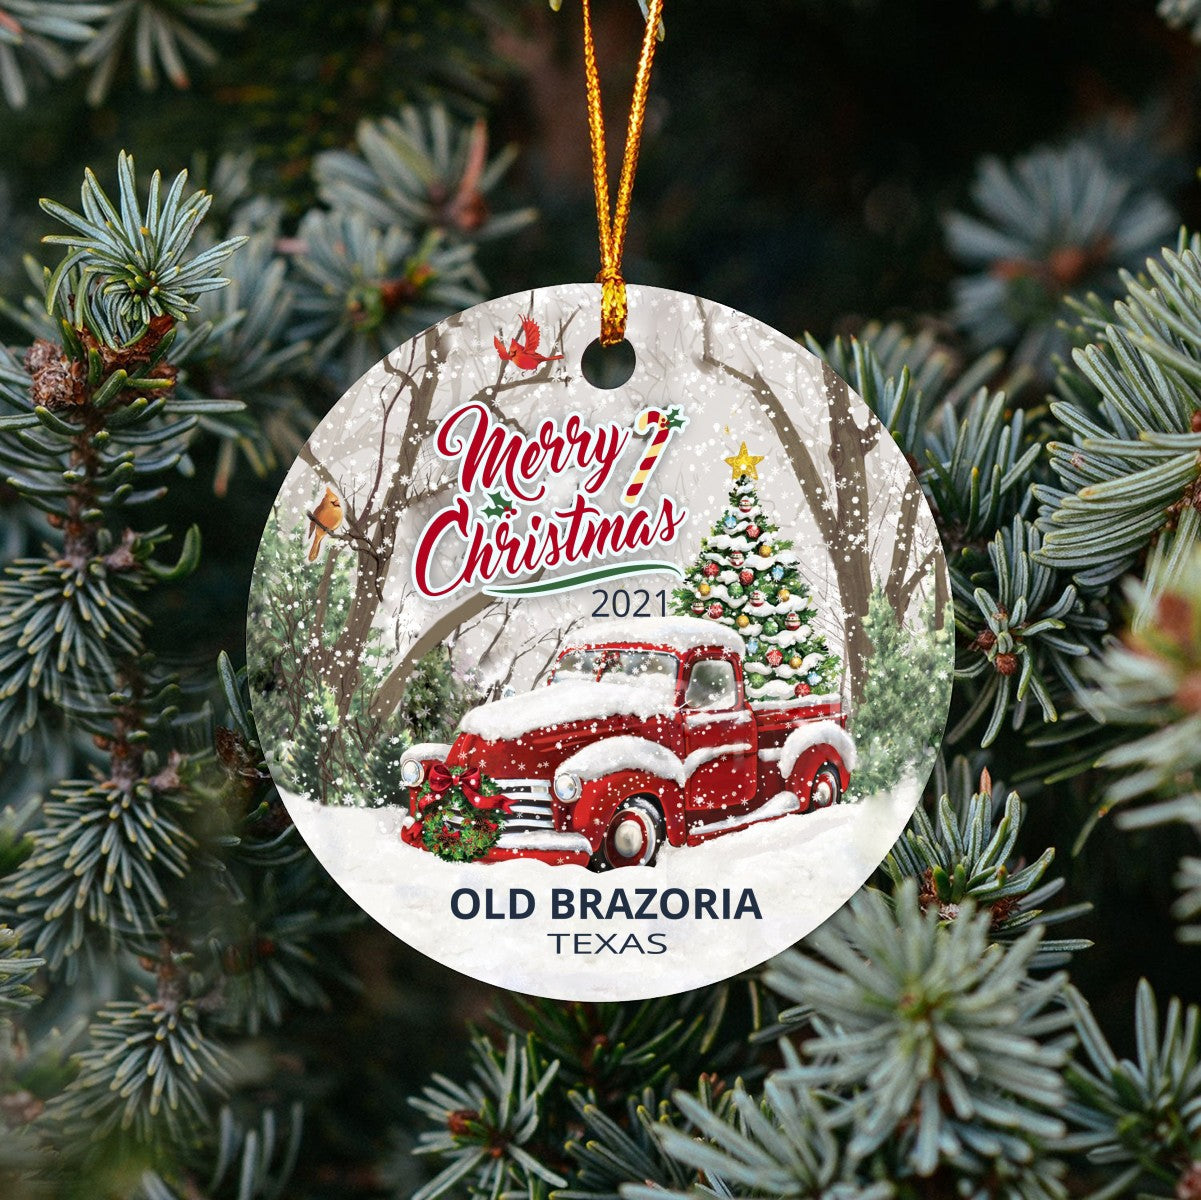 Christmas Tree Ornaments Old Brazoria - Ornament With Name City, State Old Brazoria Texas TX Ornament - Red Truck Xmas Ornaments 3'' Plastic Gift For Family, Friend And Housewarming